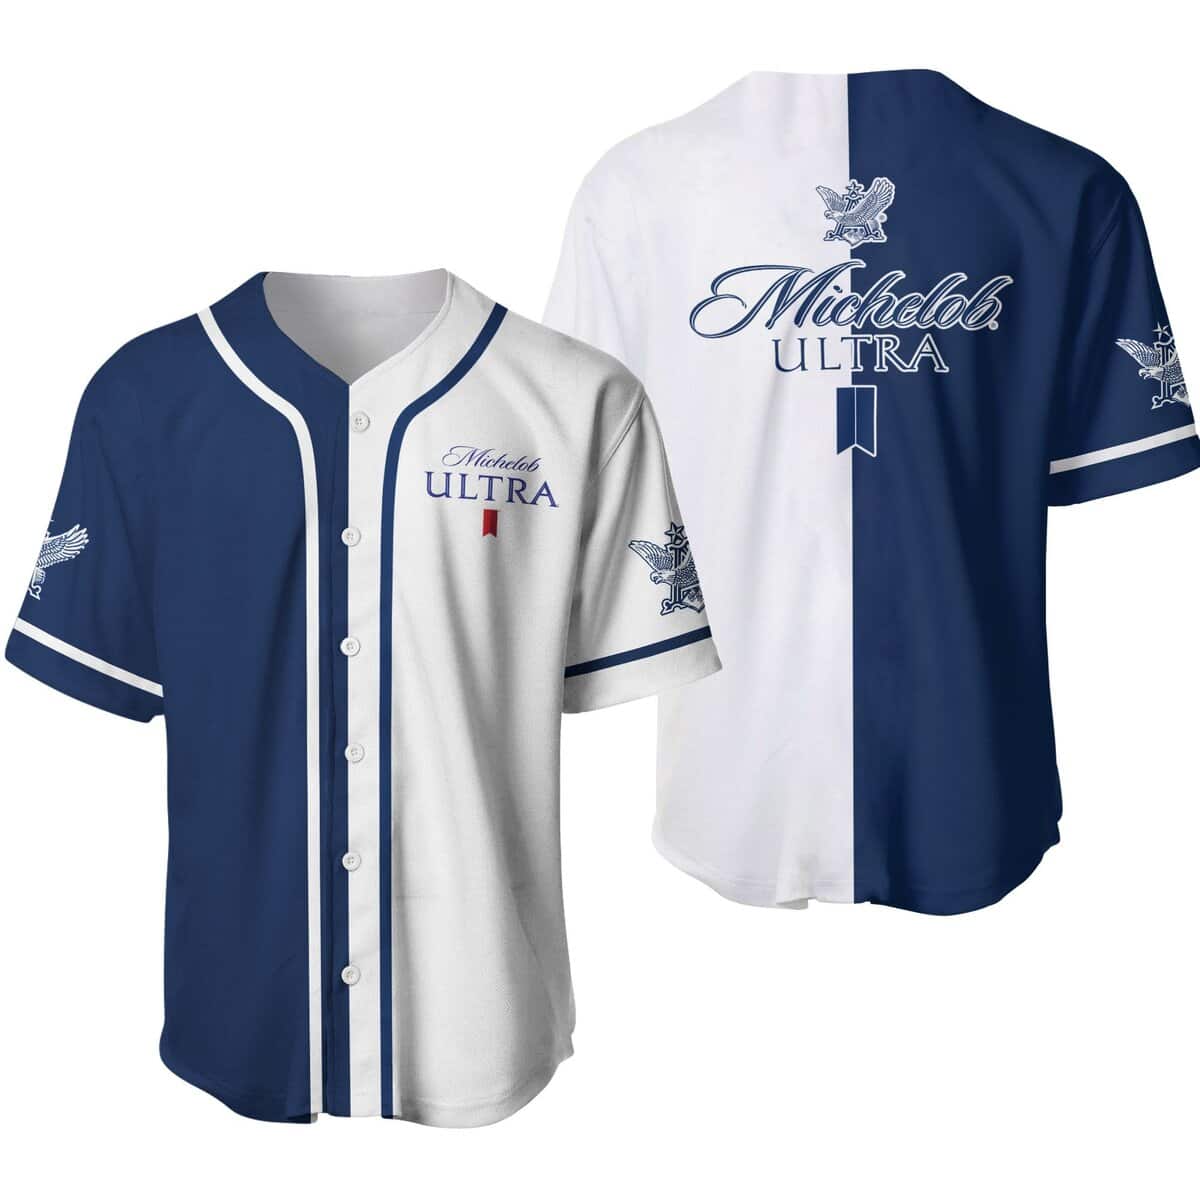 Basic Michelob ULTRA Baseball Jersey Dual Colors Gift For Beer Lovers